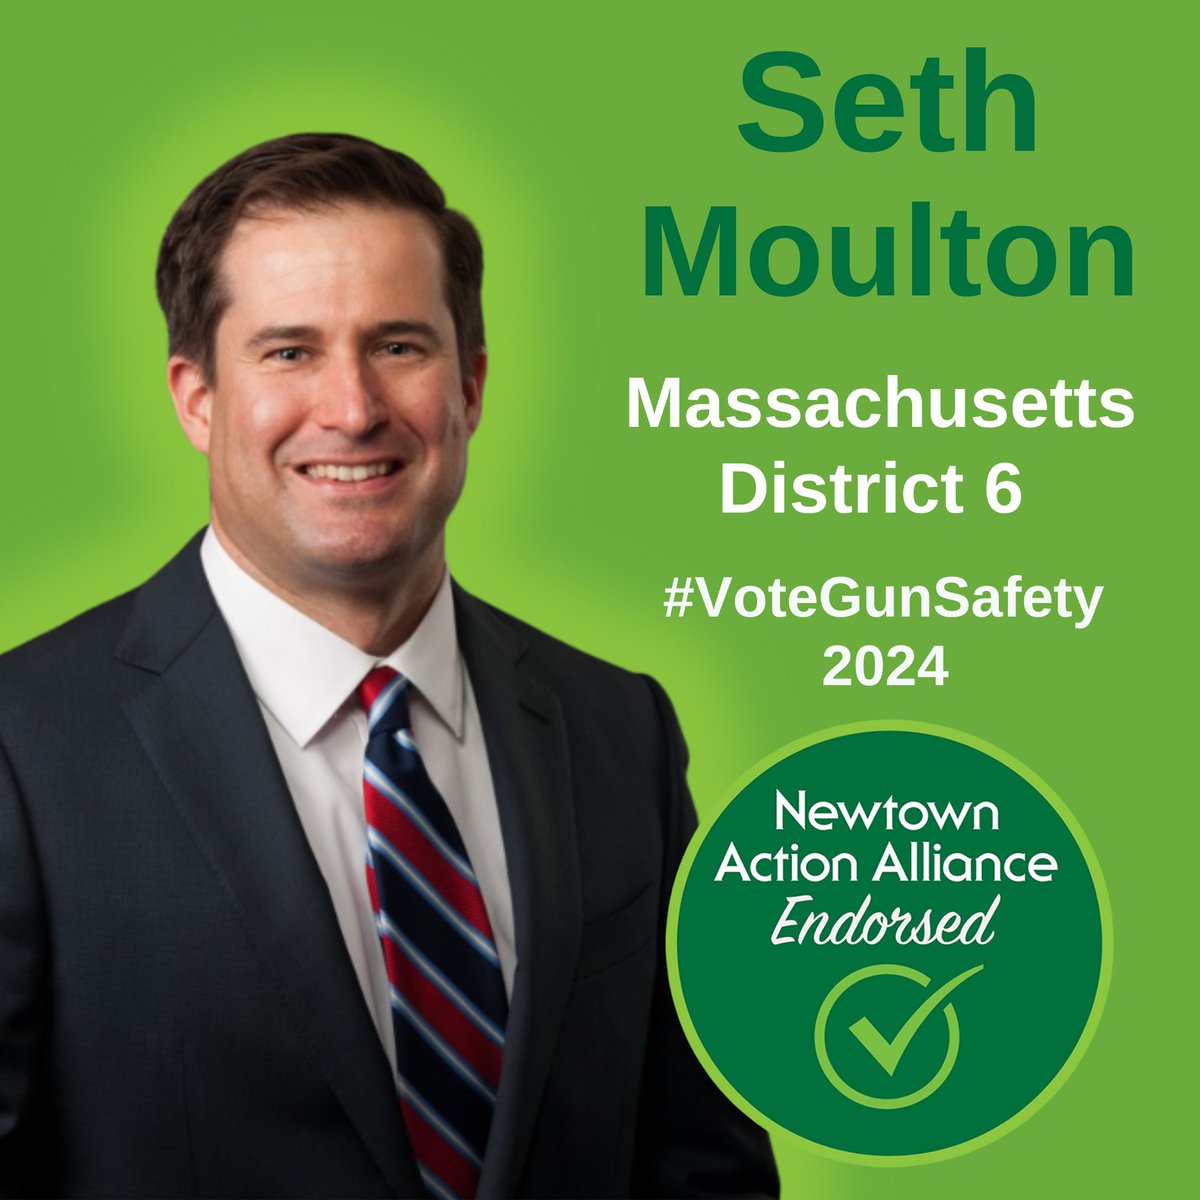 Proud to be endorsed again by @NewtownAction! As a veteran who knows what it's like to carry a firearm, I won't stop advocating for meaningful gun reform that includes gun owners in the conversation. I'm working hard to help elect others who are committed to doing the same.